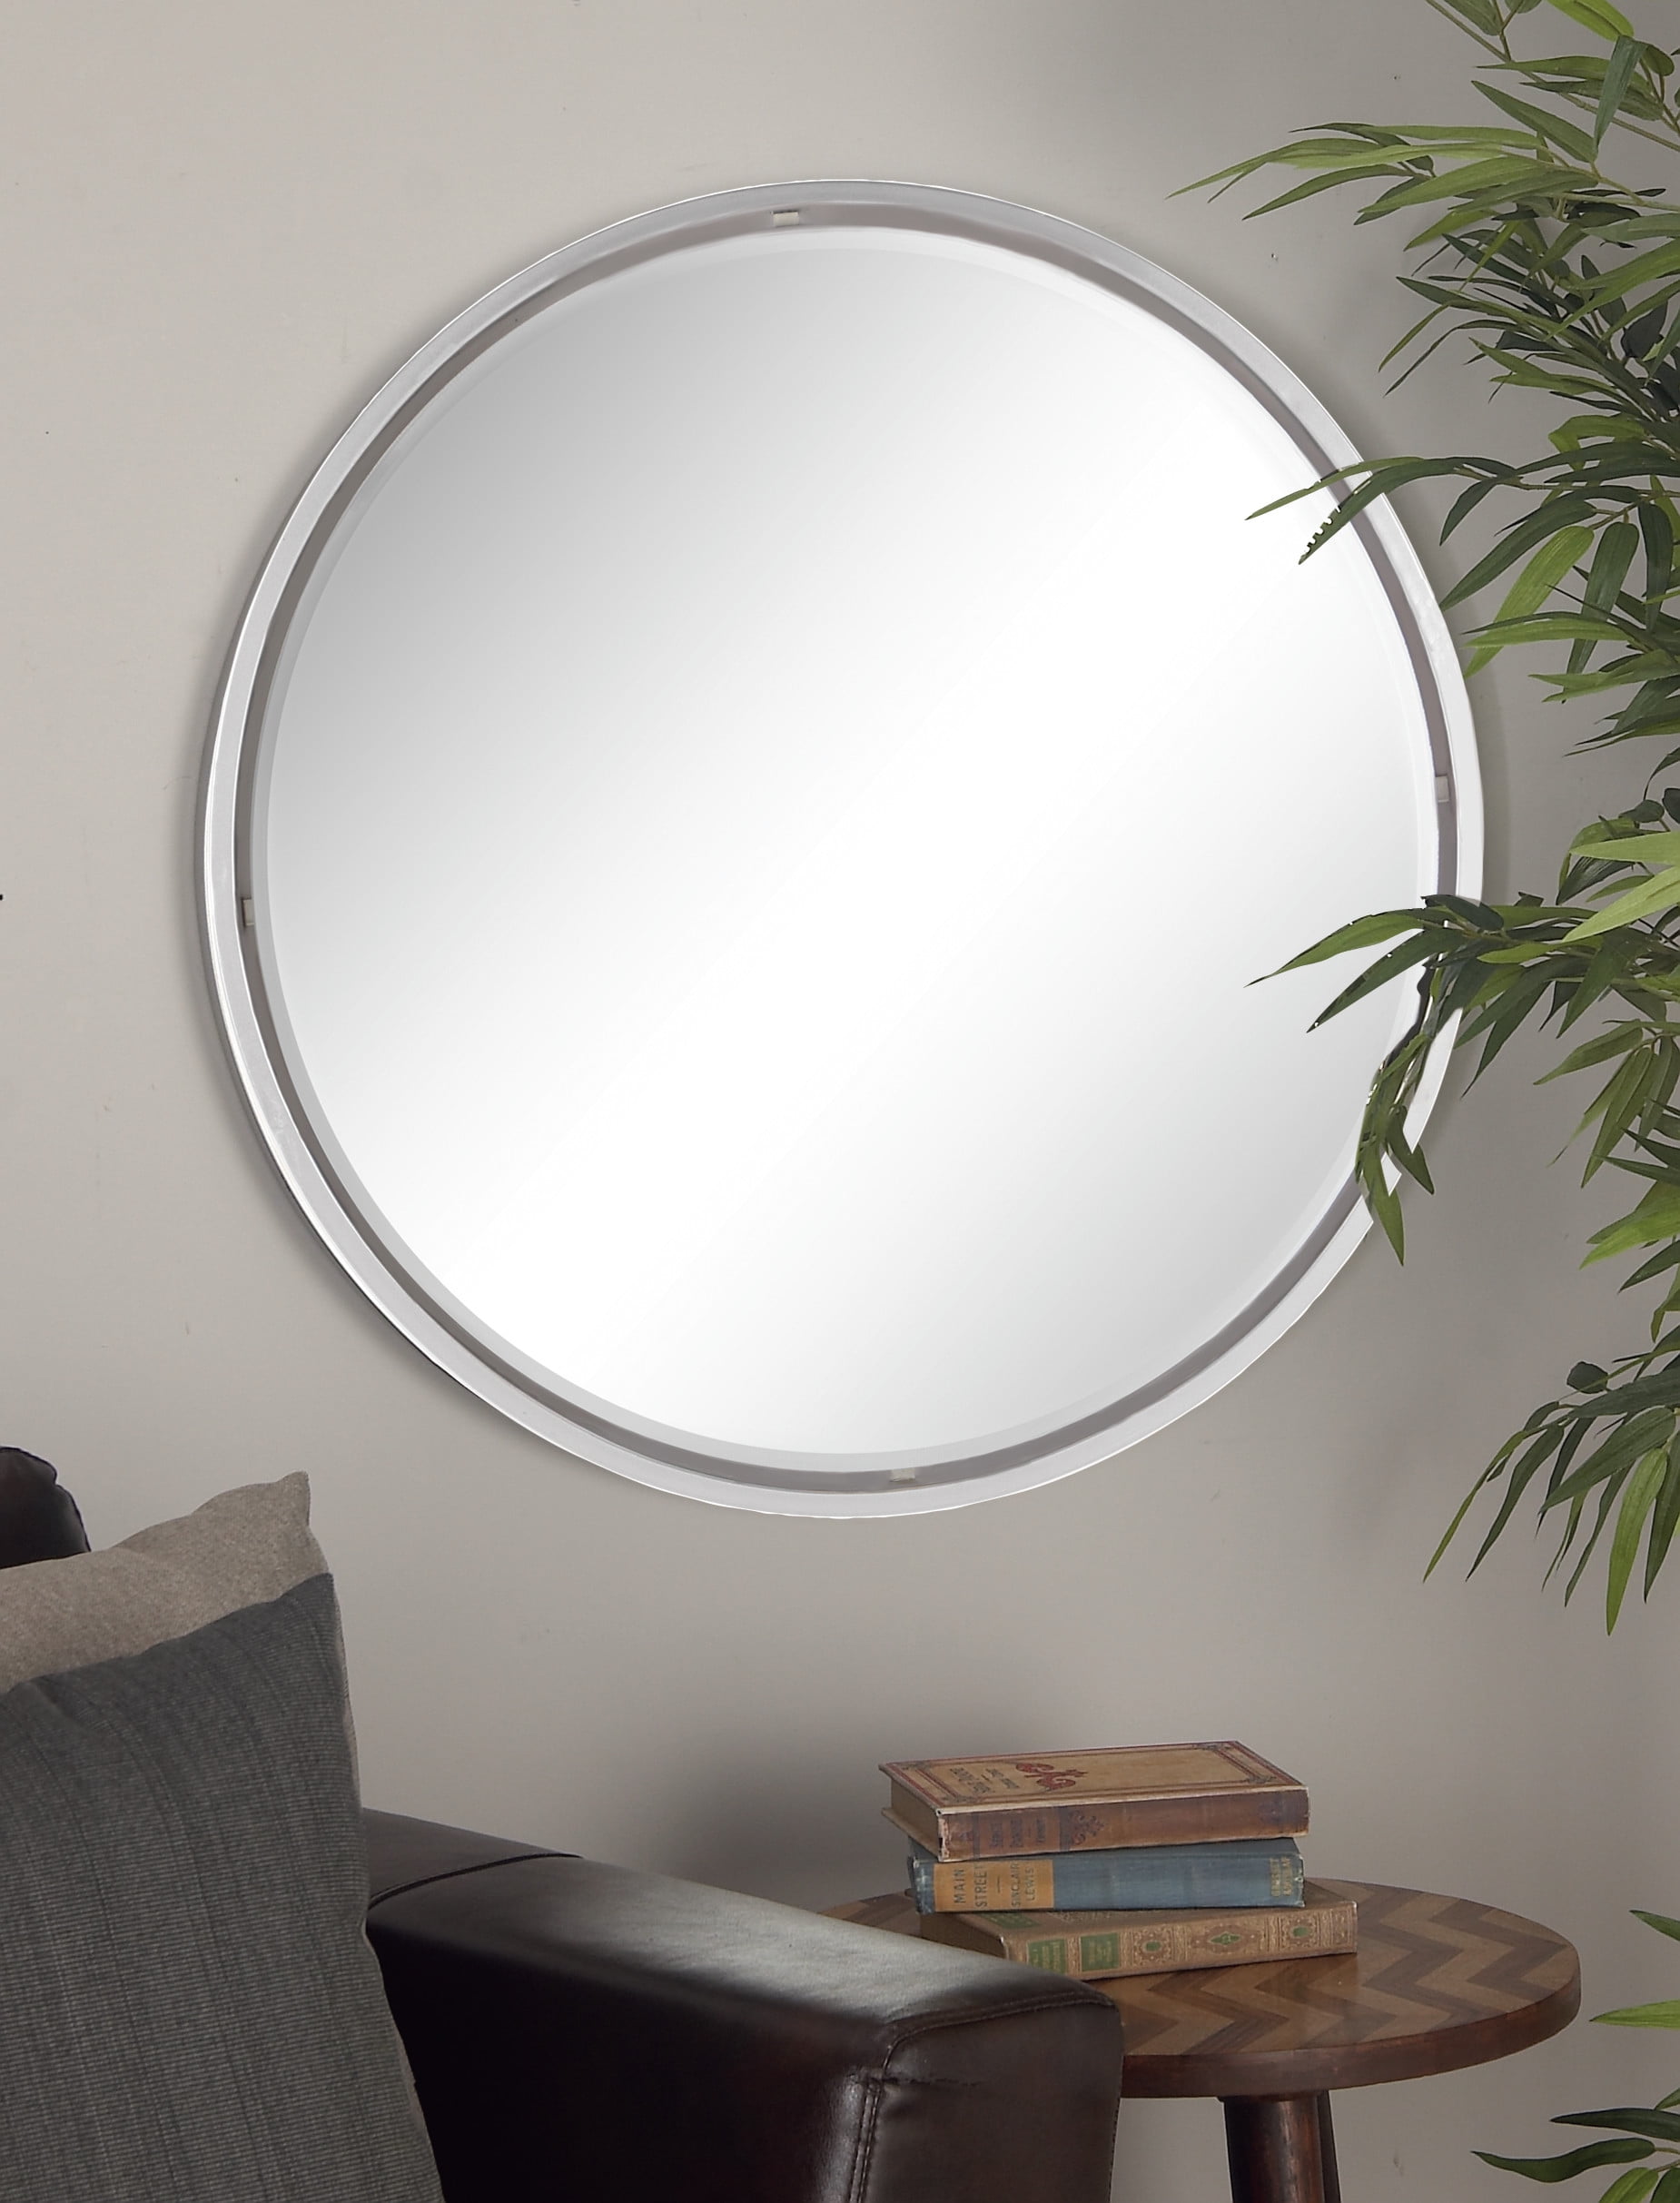 DecMode Extra Large Round Silver Wall Mirror, 30" - Walmart.com